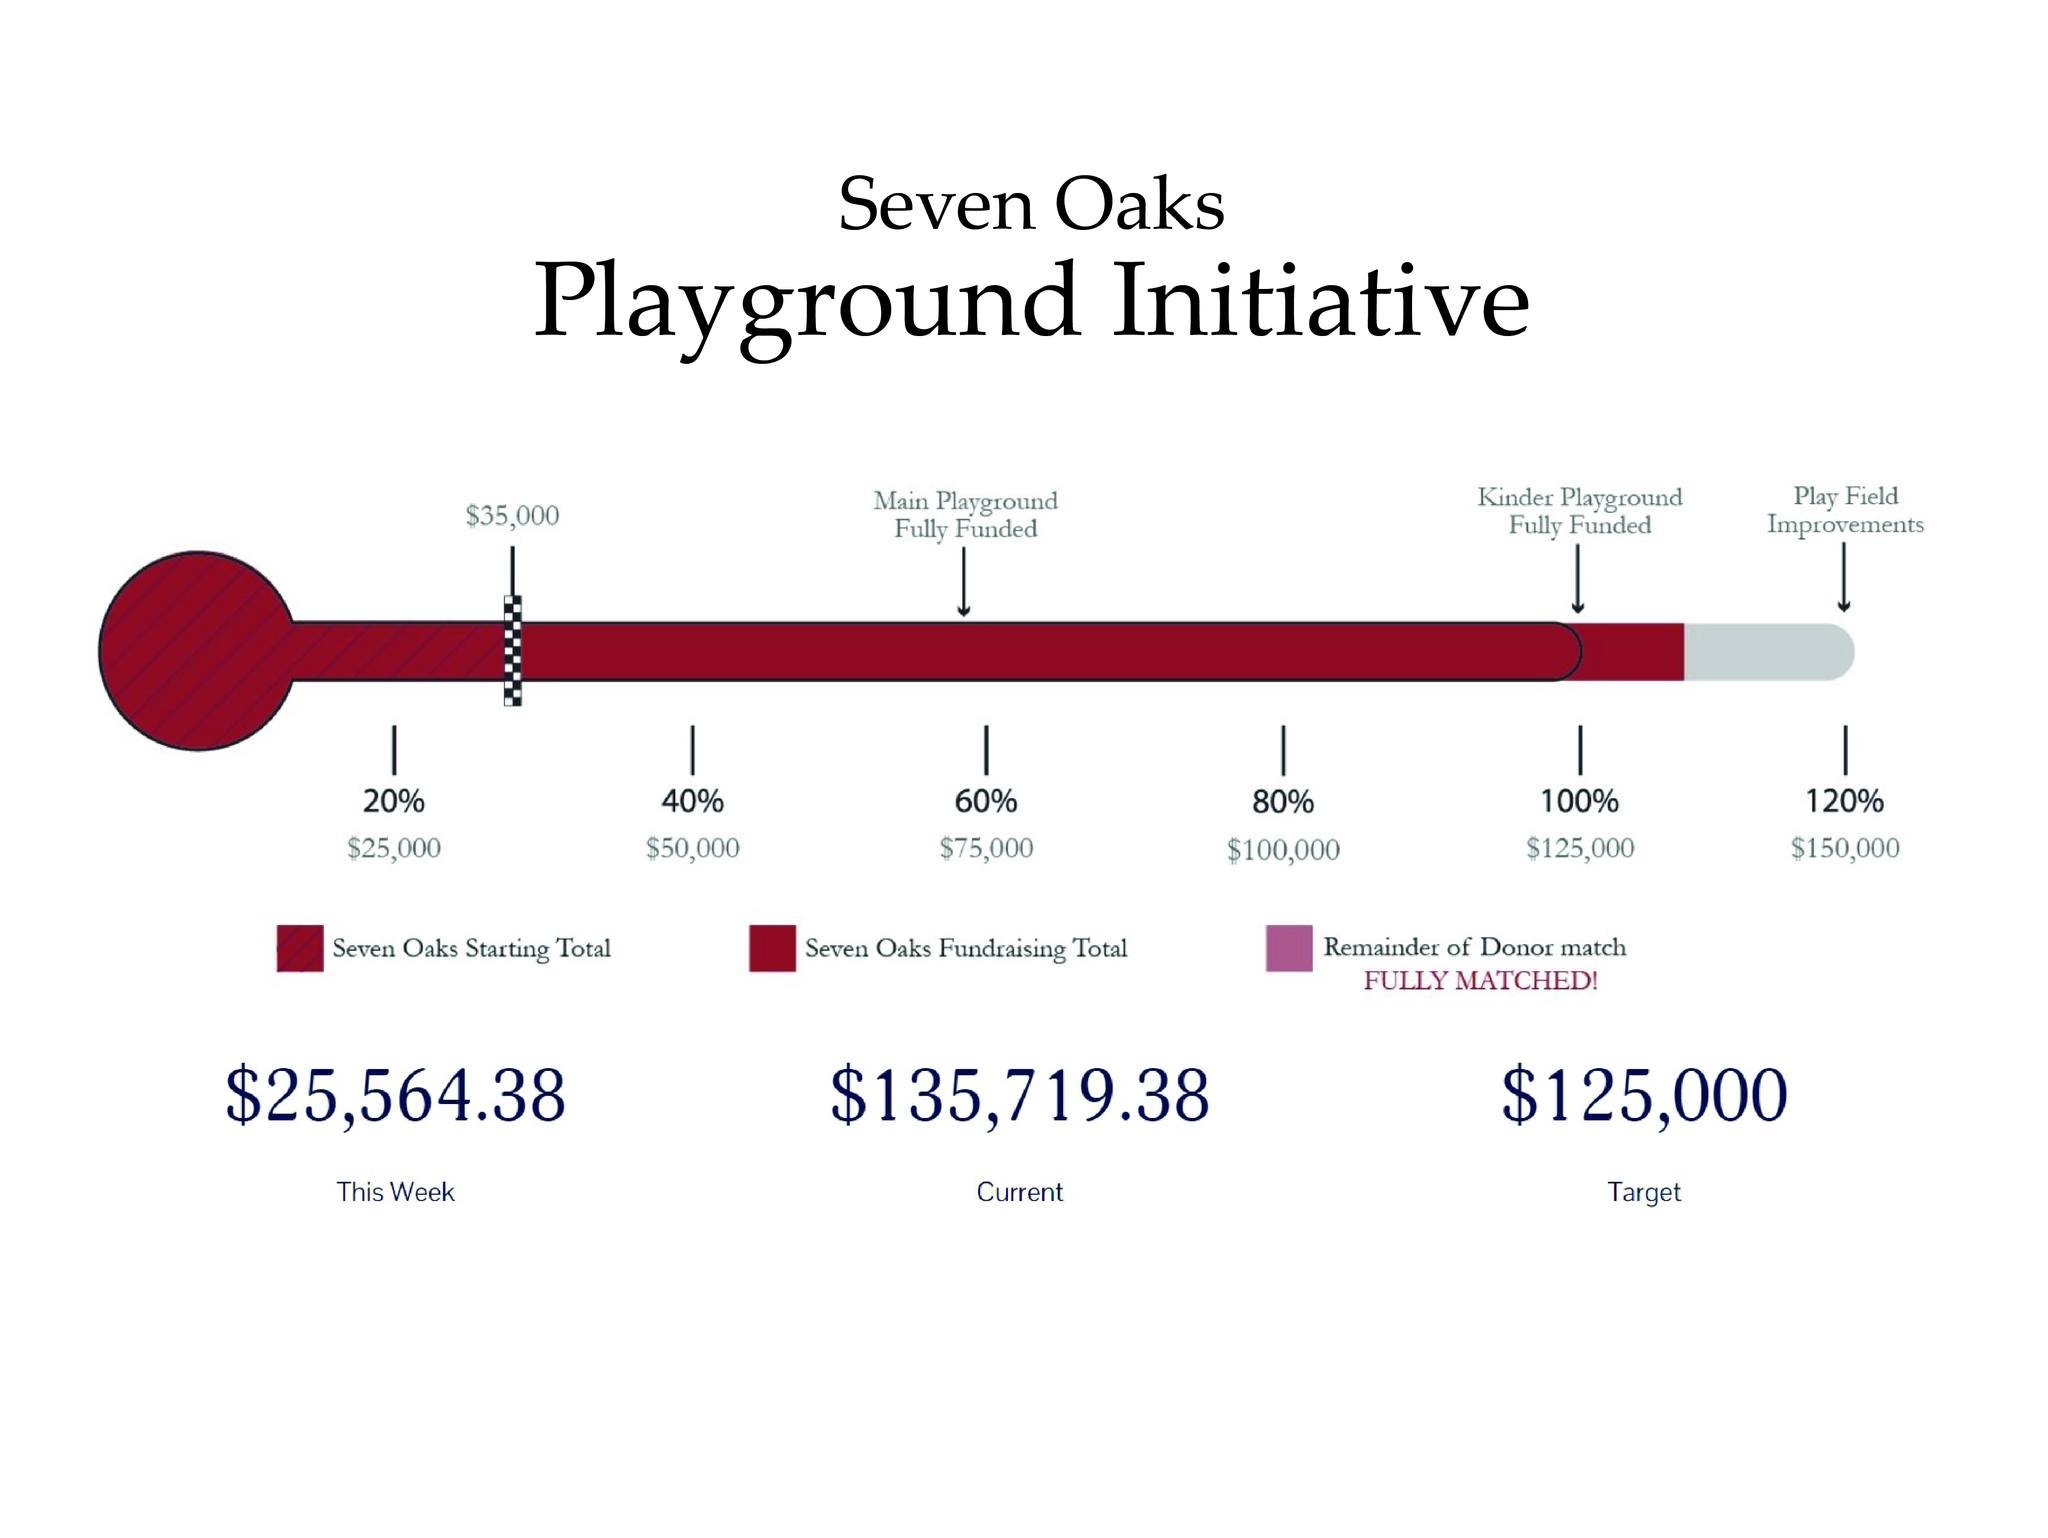 The results of the Playground Initiative are in!!!
 
We did it! Thanks to the generosity of so many of you, we met our goal for the Playground Initiative. The total raised is an astonishing $135,719.38! 

We owe a special debt of gratitude to the ano